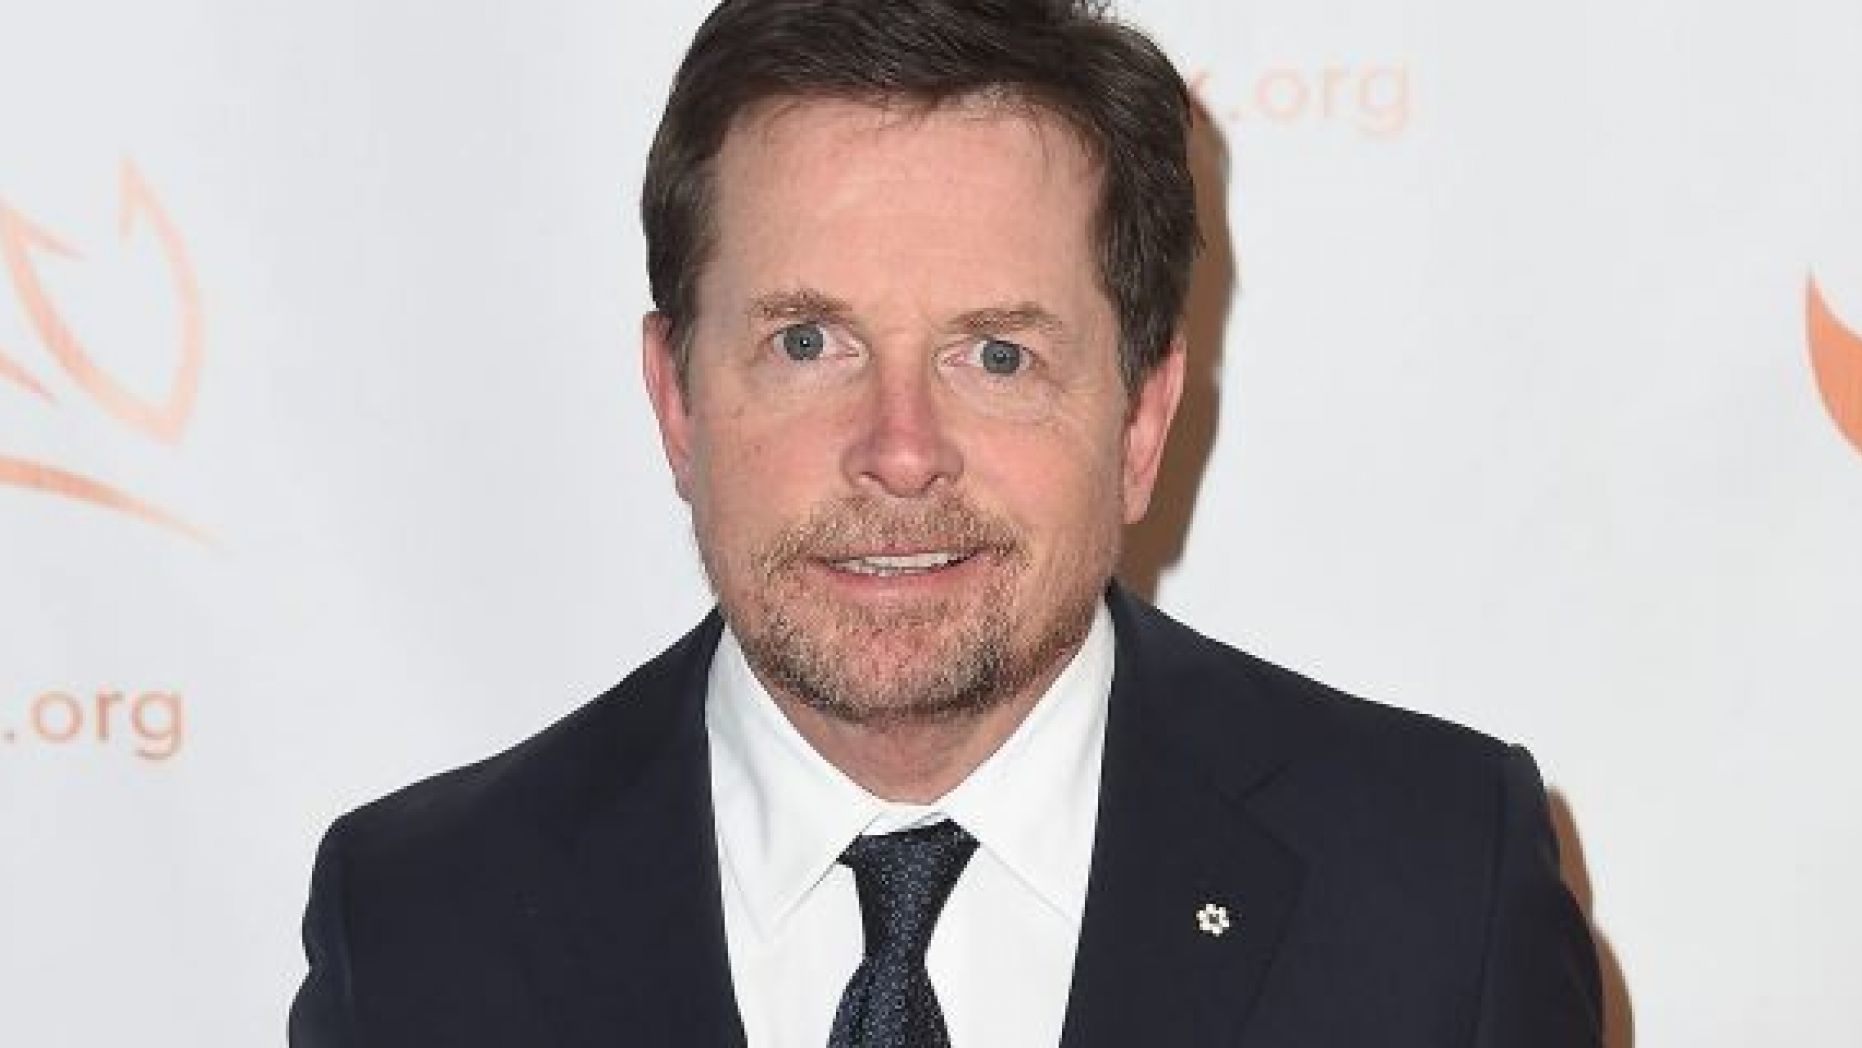 Michael J. Fox opened up about health scares he recently faced amid his battle with Parkinson's disease.